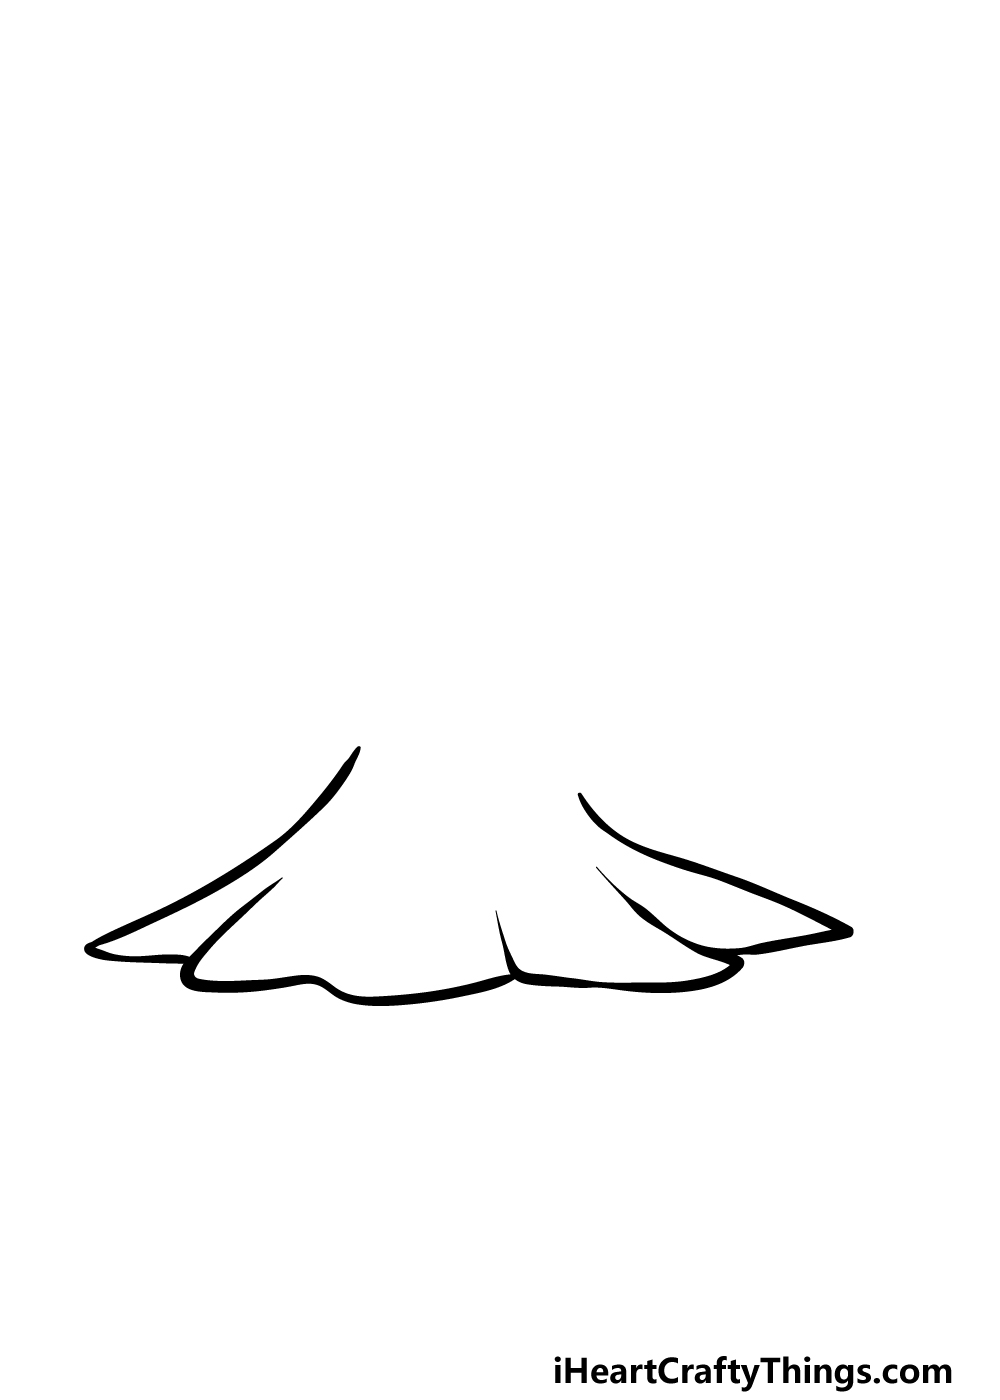 Cartoon Volcano Drawing - How To Draw A Cartoon Volcano Step By Step